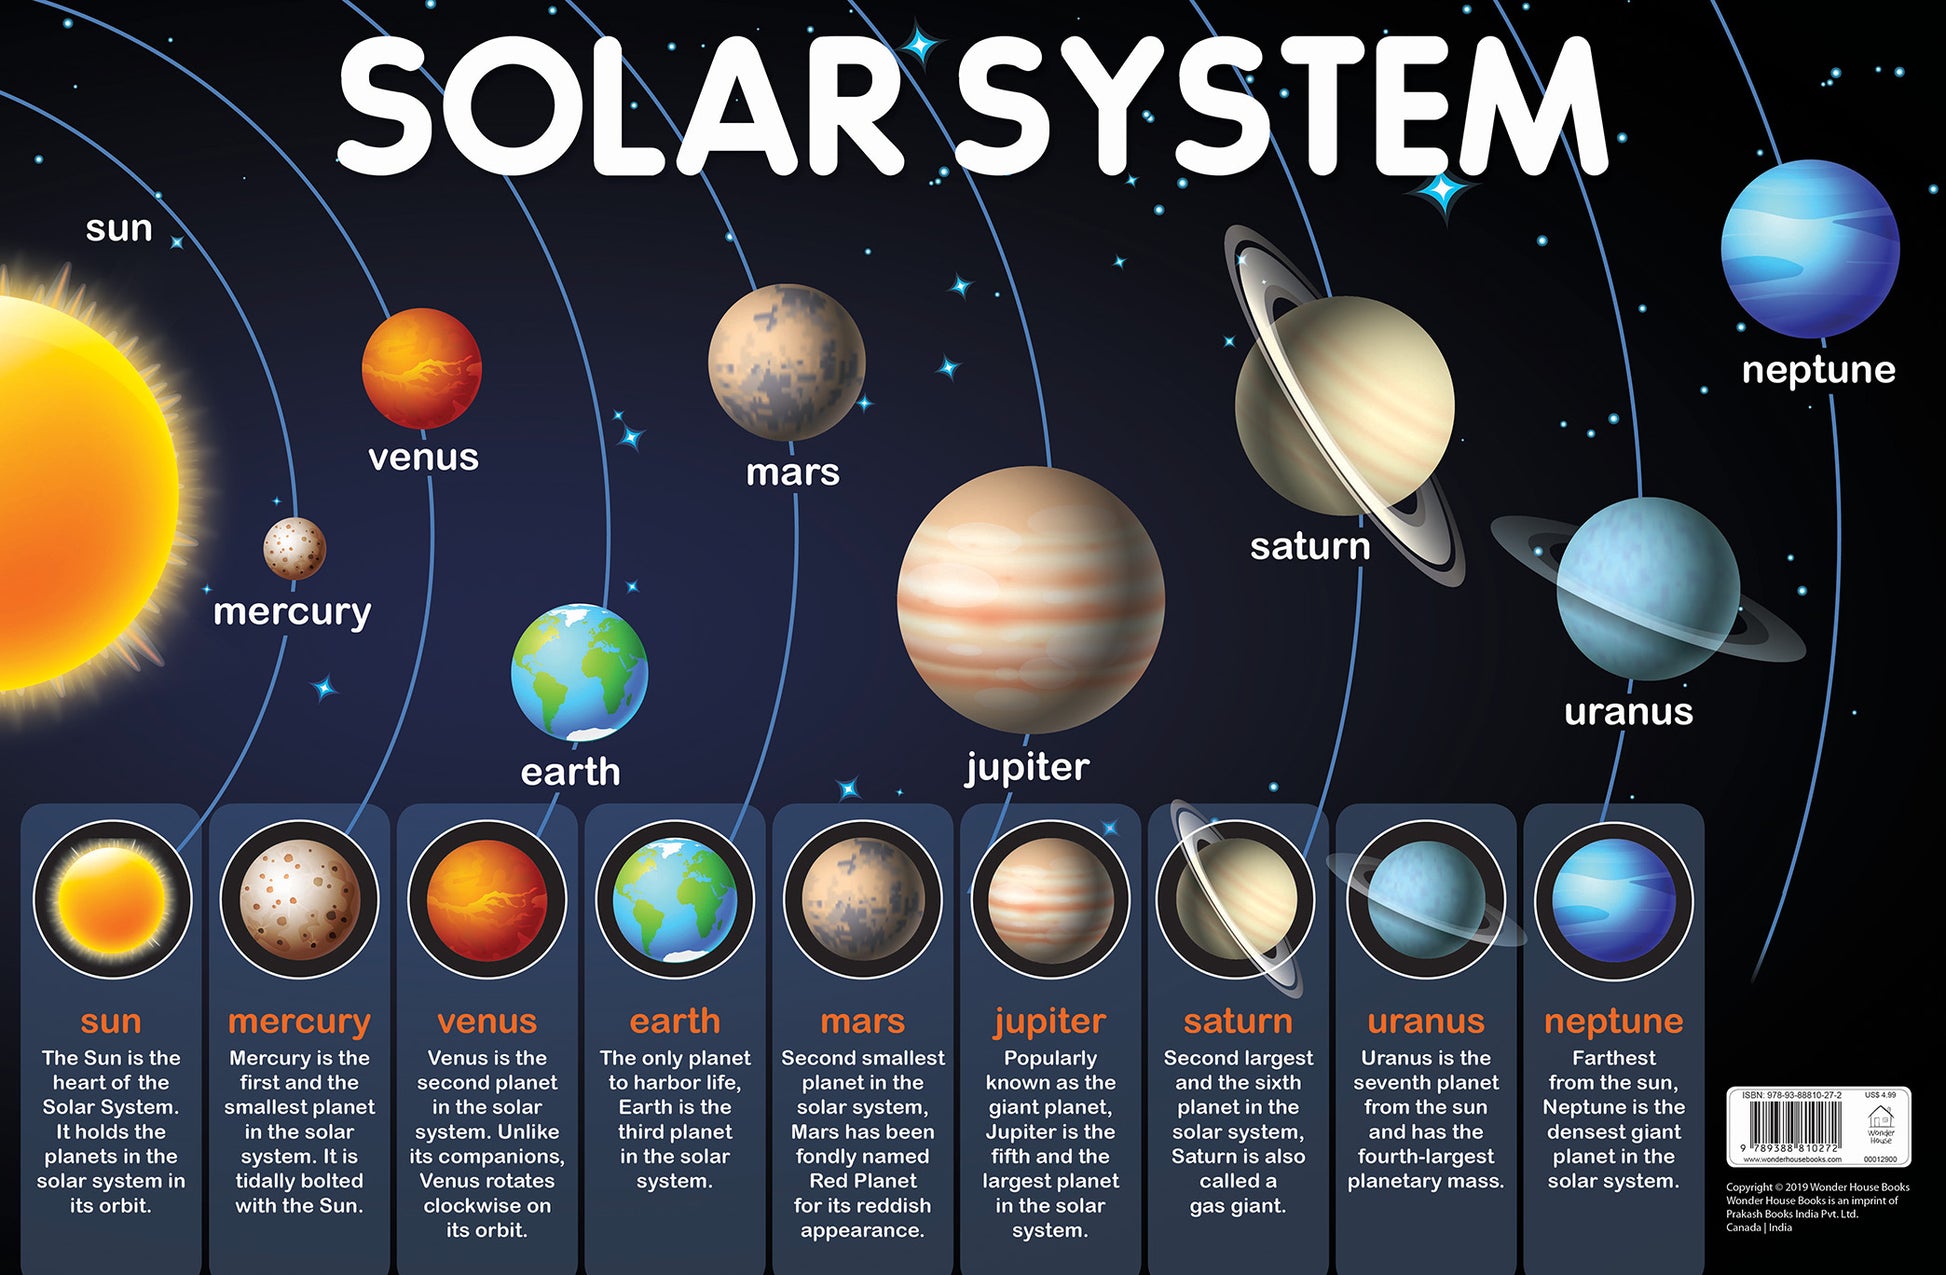 Solar System - Early Learning Educational Posters For Children: Perfect For Kindergarten, Nursery and Homeschooling (19 Inches X 29 Inches)